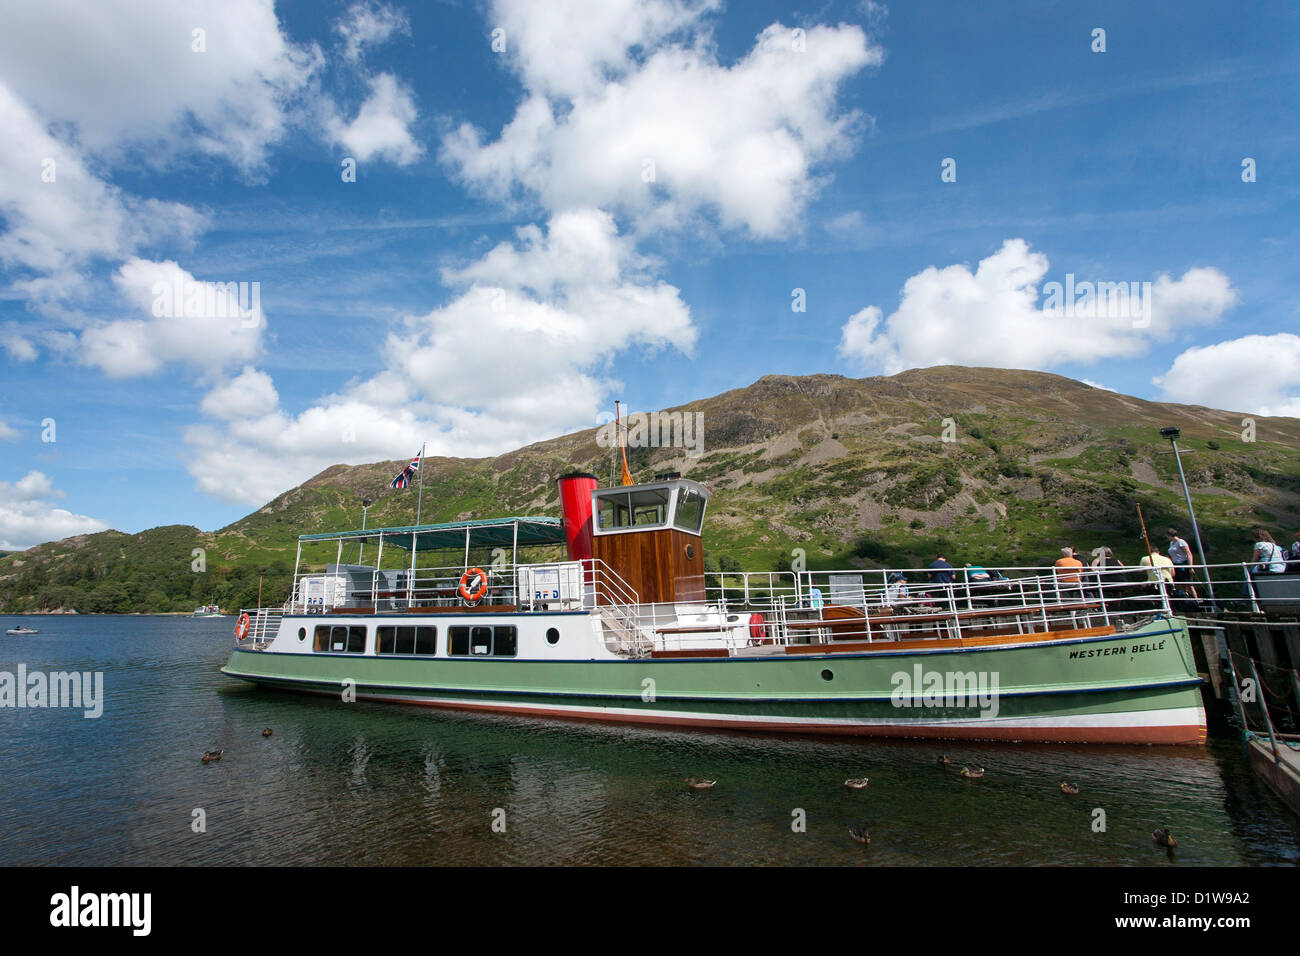 Ullswater steamer Western Belle at Glenridding Pier, Ullswater, The English Lake District, Cumbria, England Stock Photo